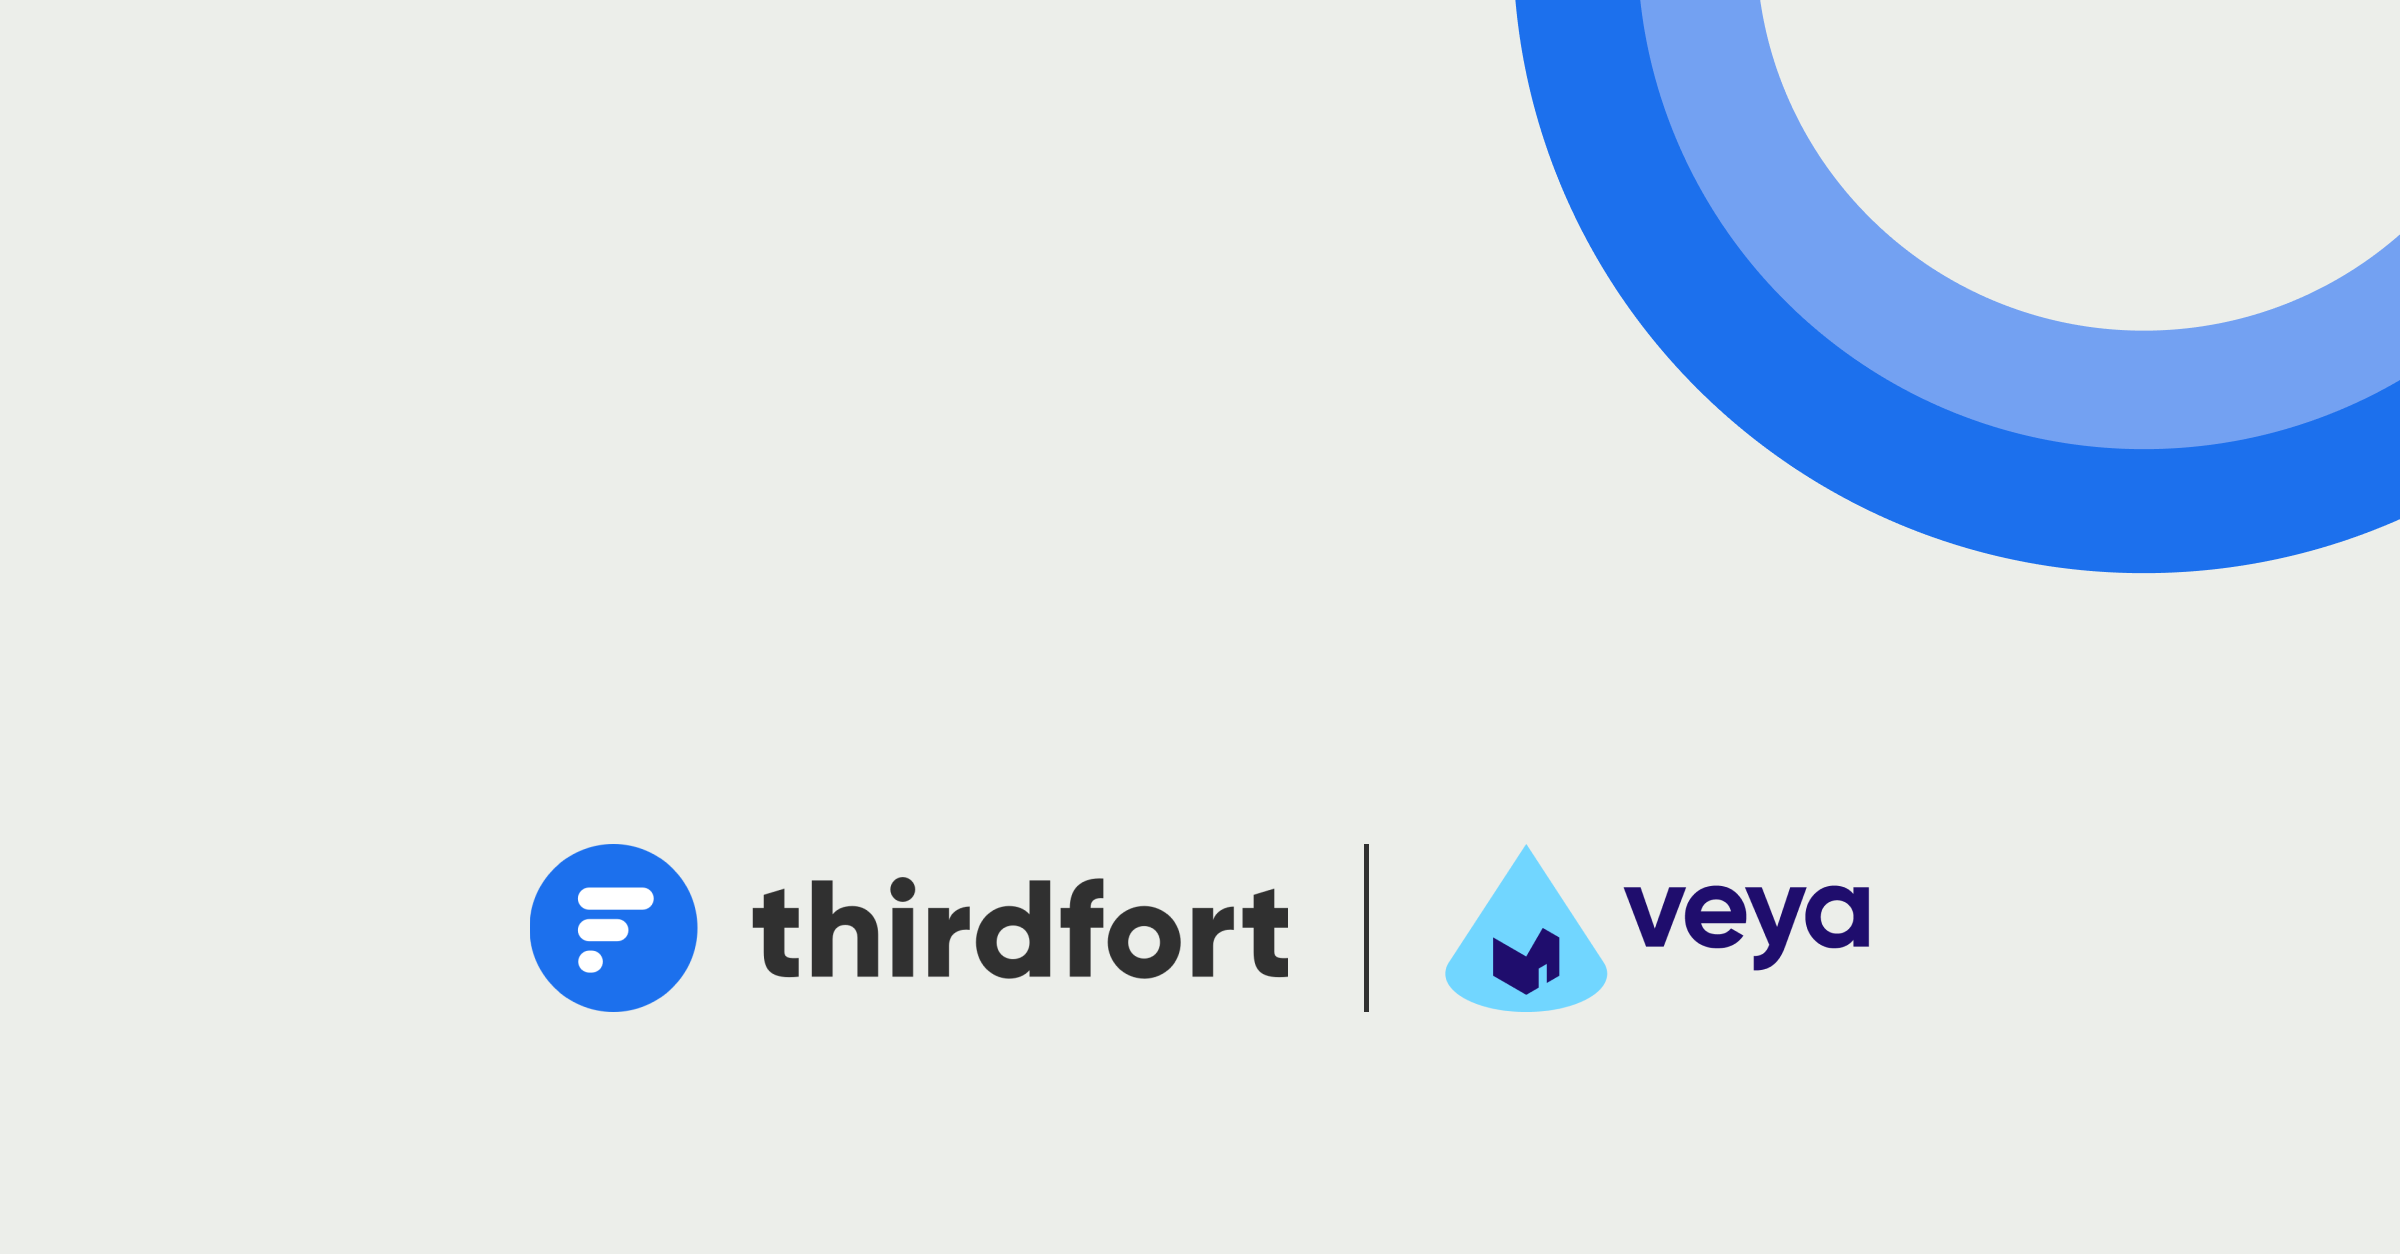 Thirdfort logo and Veya logo on a grey background with a blue semi circle graphic on the right